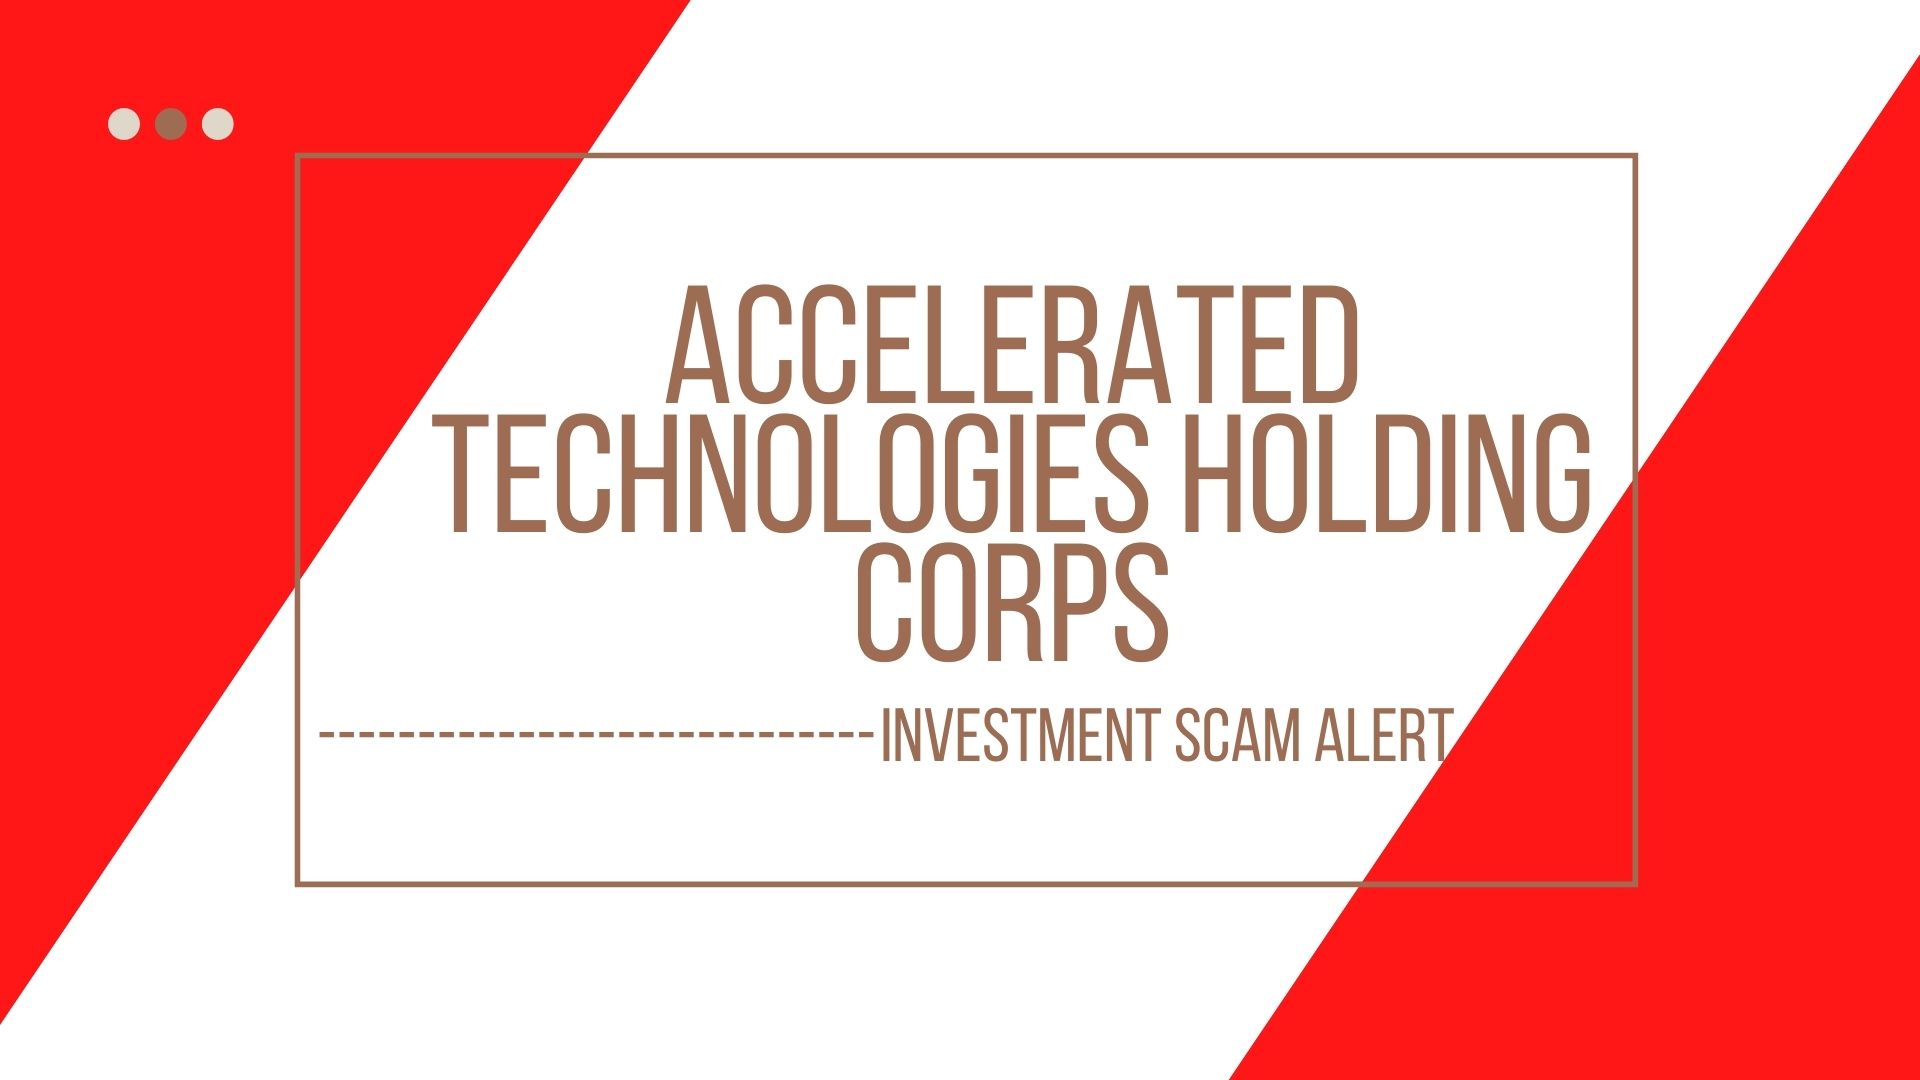 Business Scam Alert: Accelerated Technologies Holding Corps